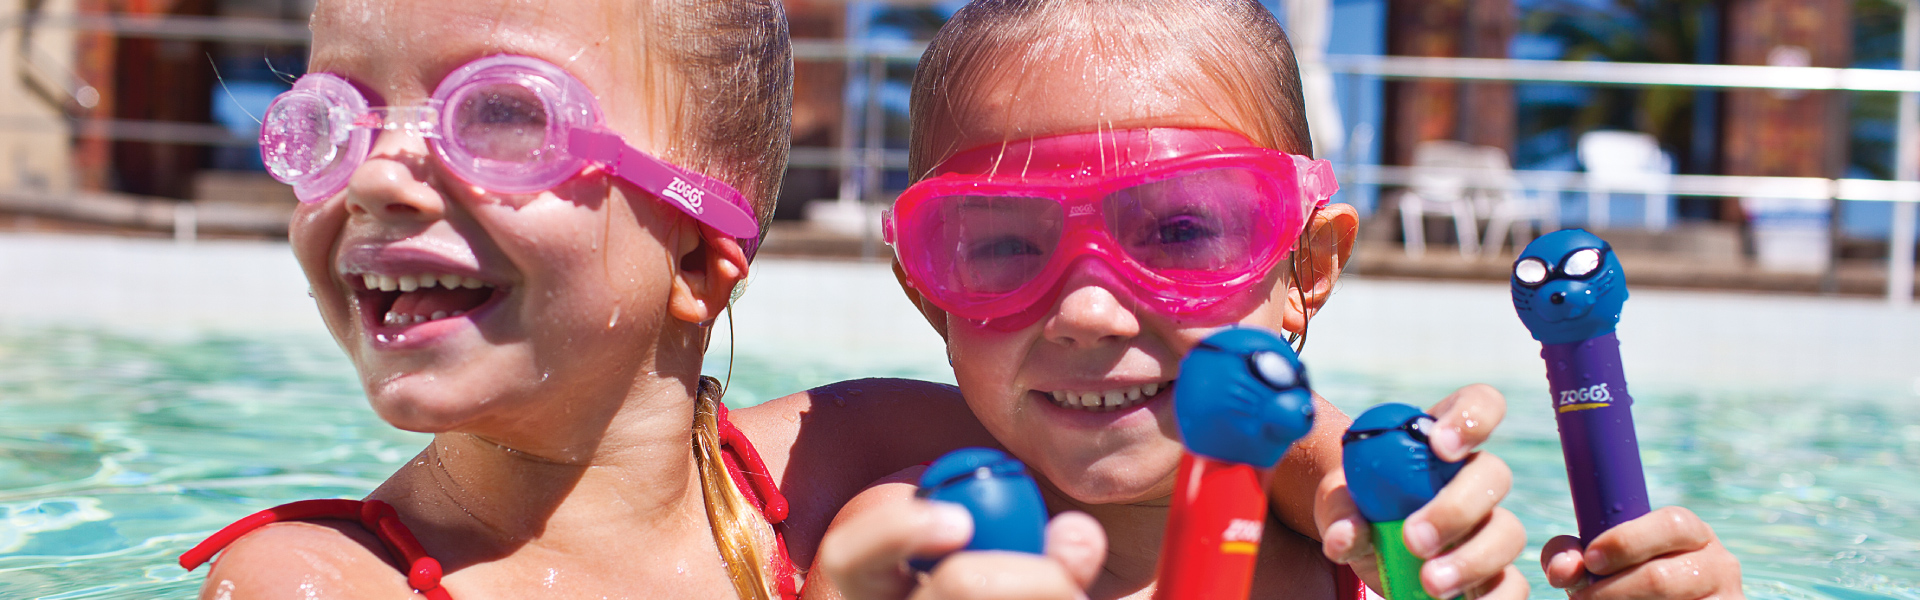 Product Spotlight: NEW Pool Games for kids & adults alike!